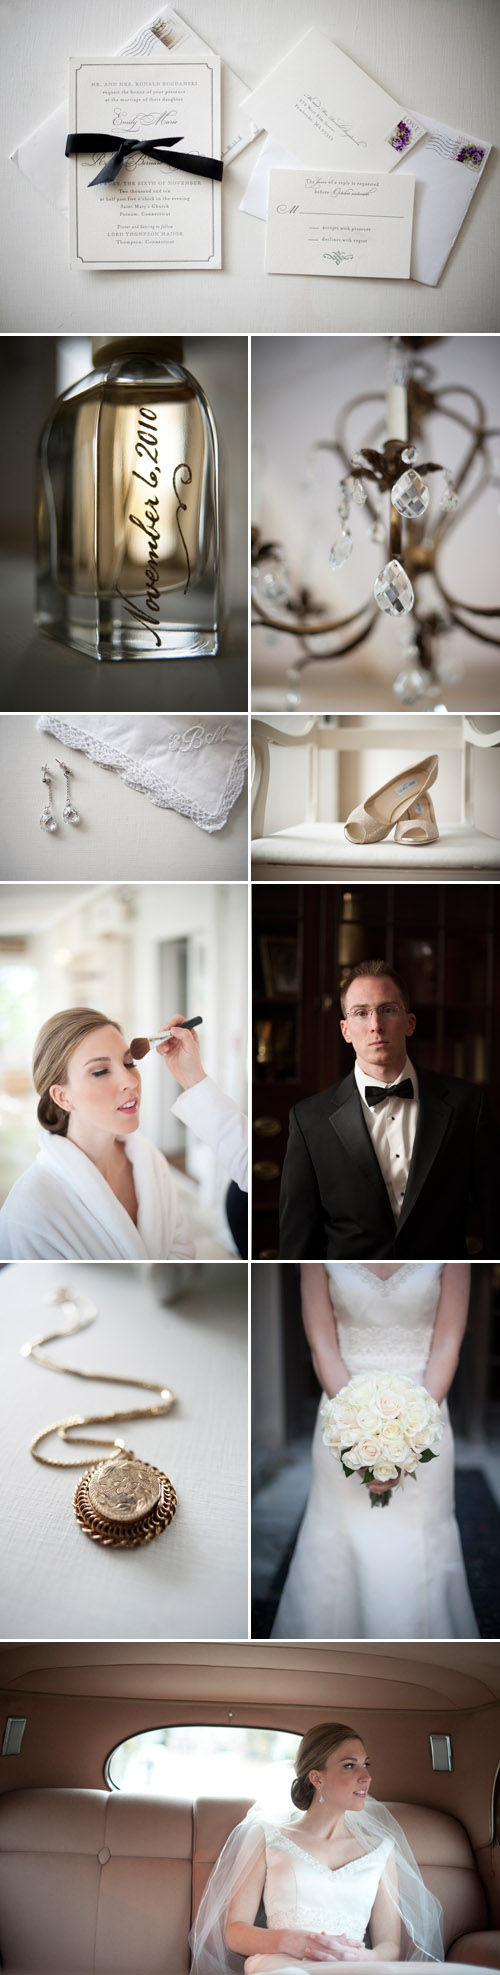 classic cream and white real wedding at Lord Thompson Manor in Thompson, CT, photographed by Justin and Mary Photography